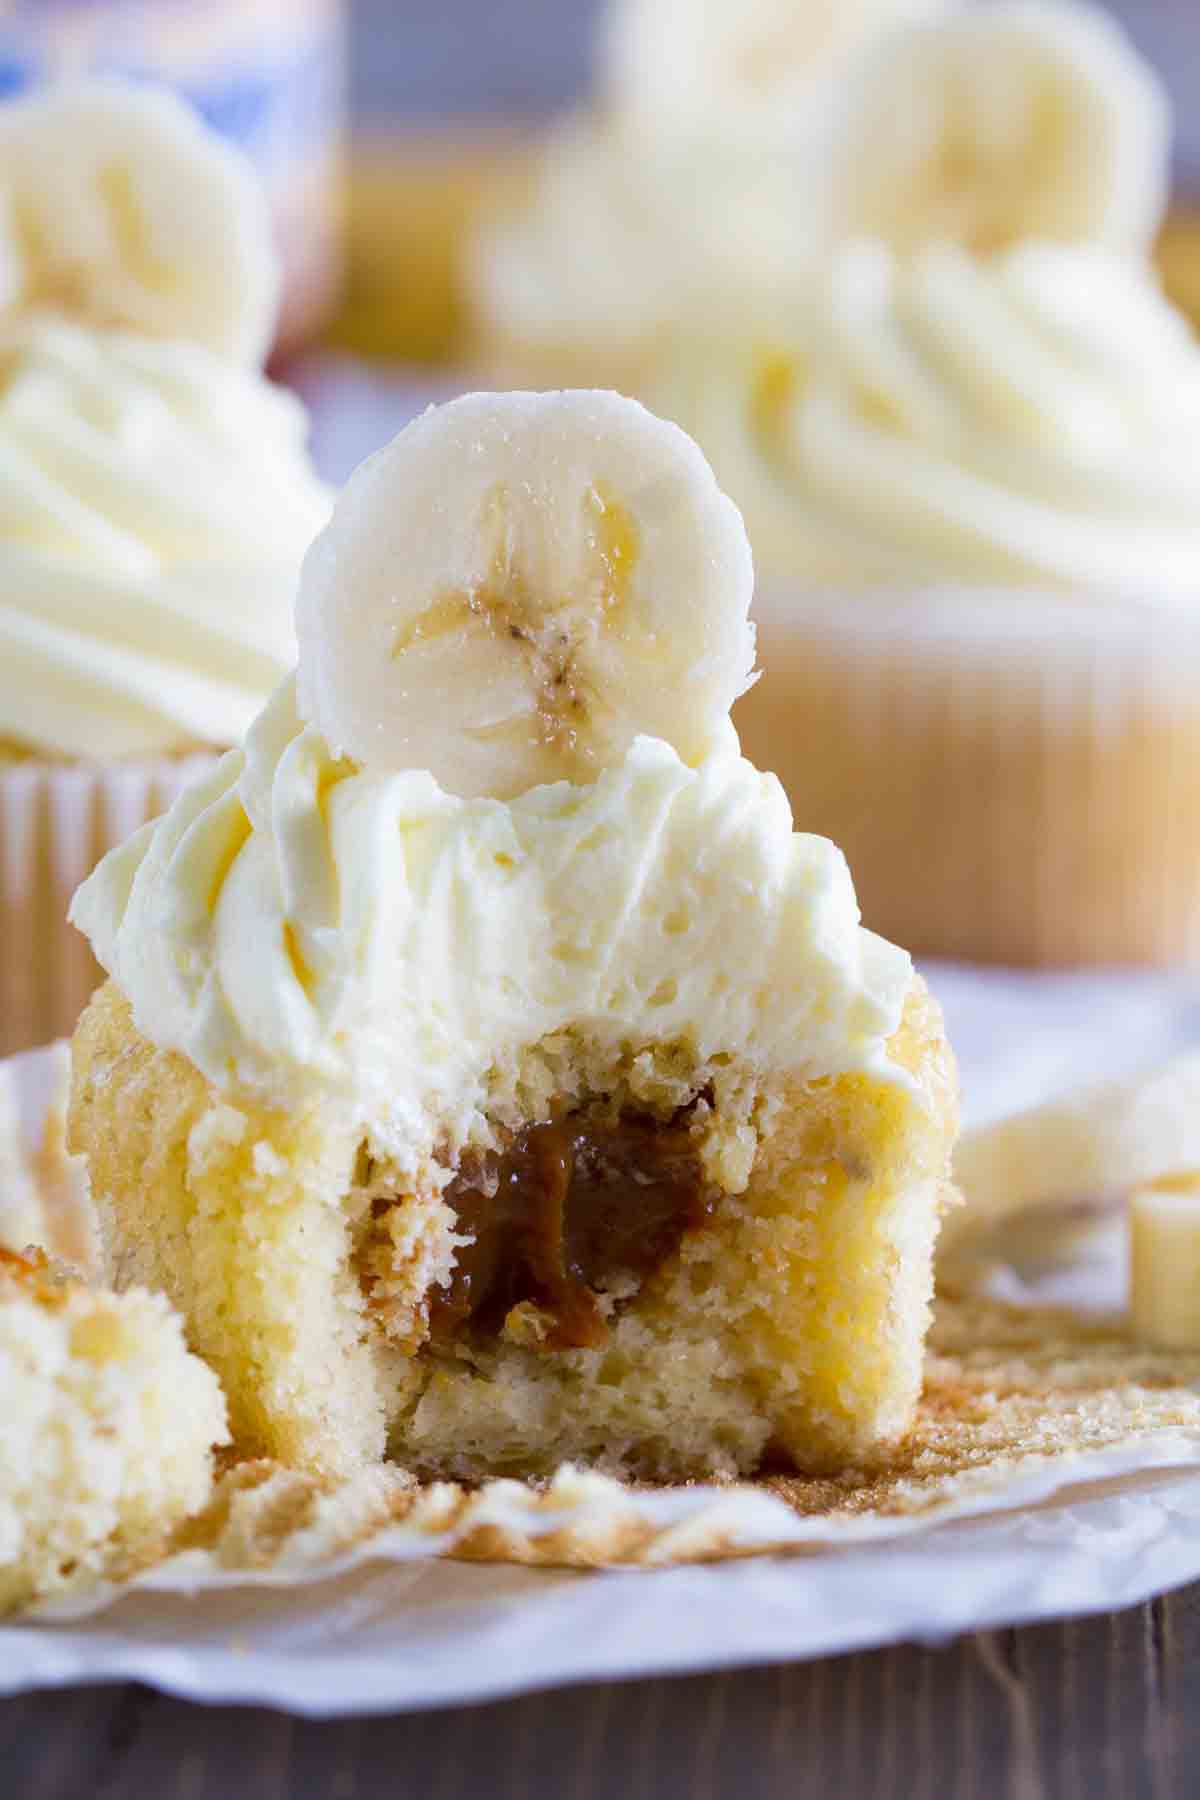 Bananas Foster Cupcake with a bite taken out showing caramel center.